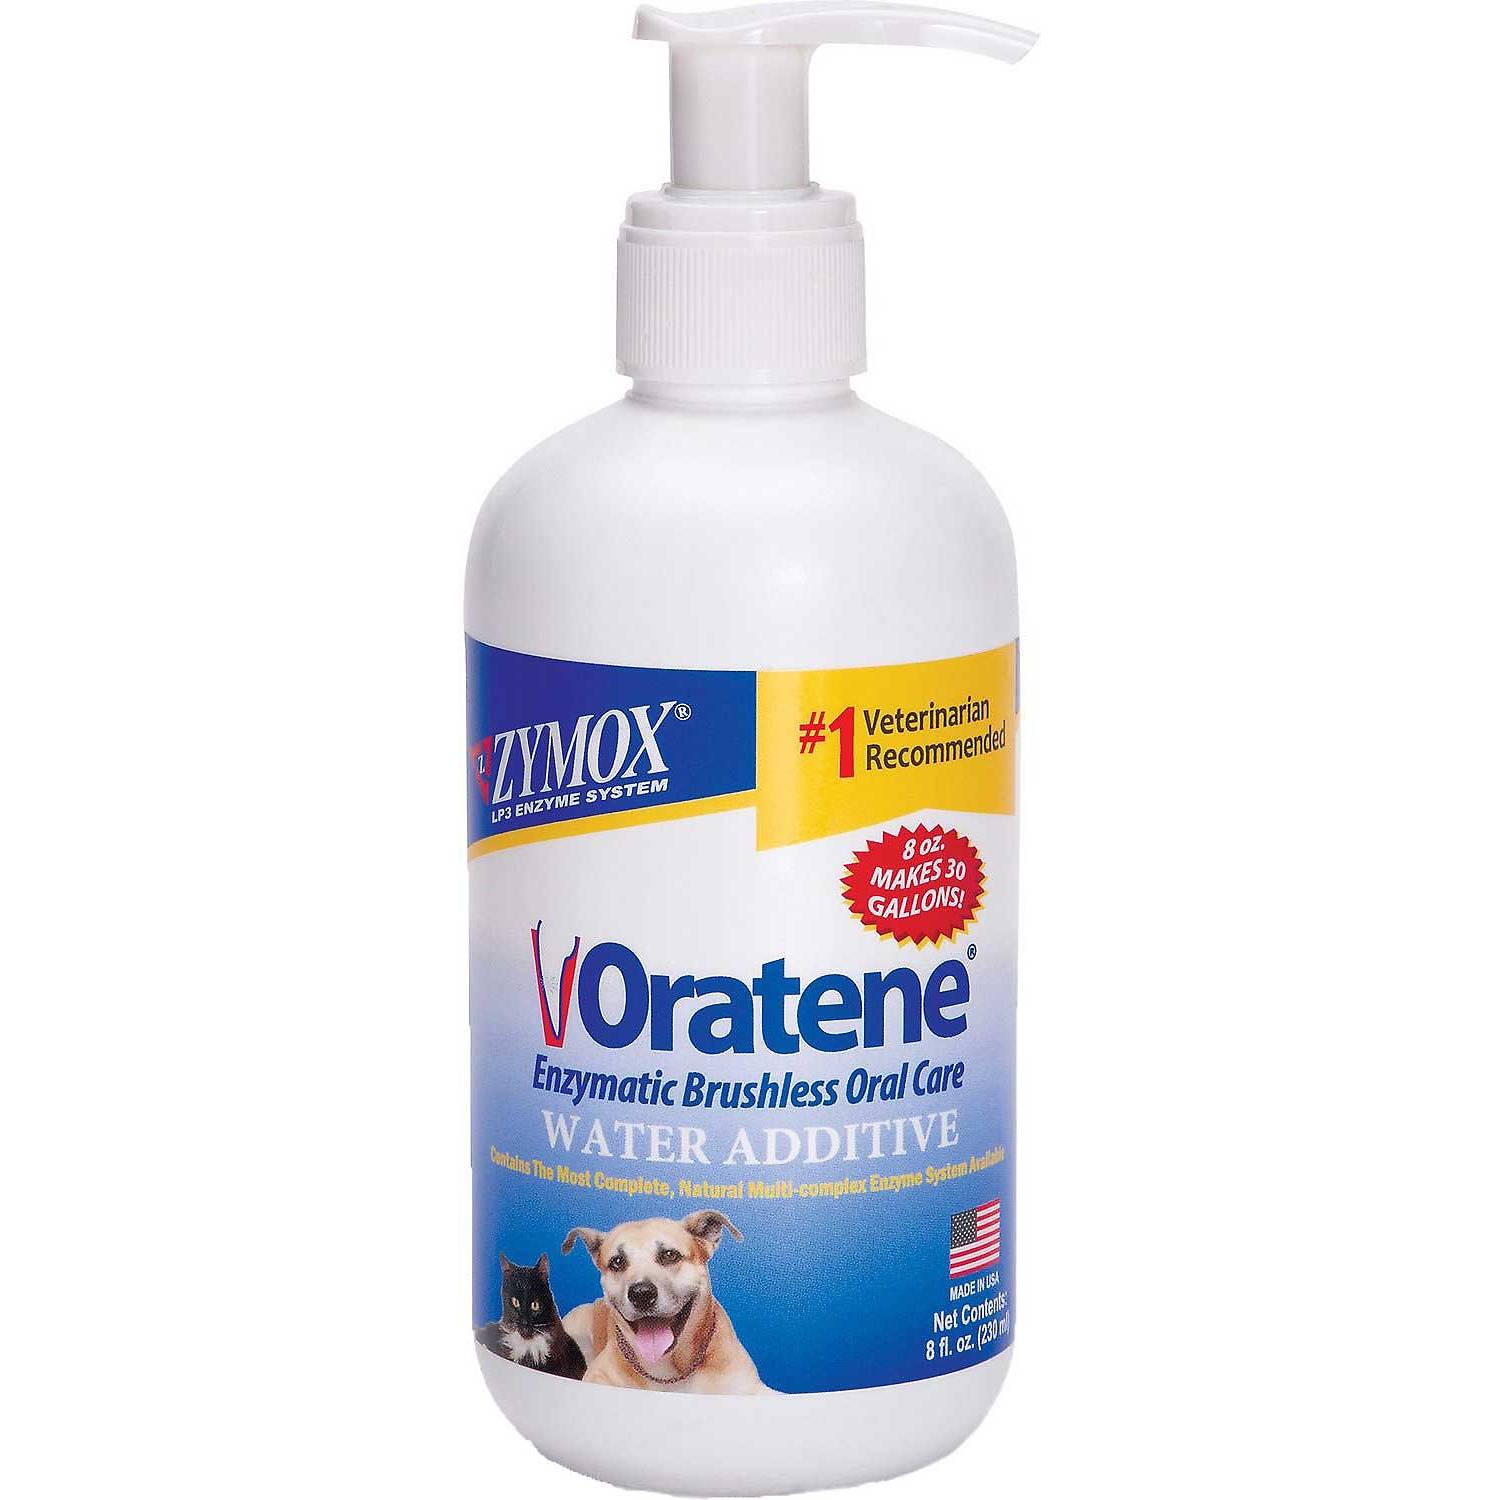 Oratene Brushless Oral Care Water Additive (1)